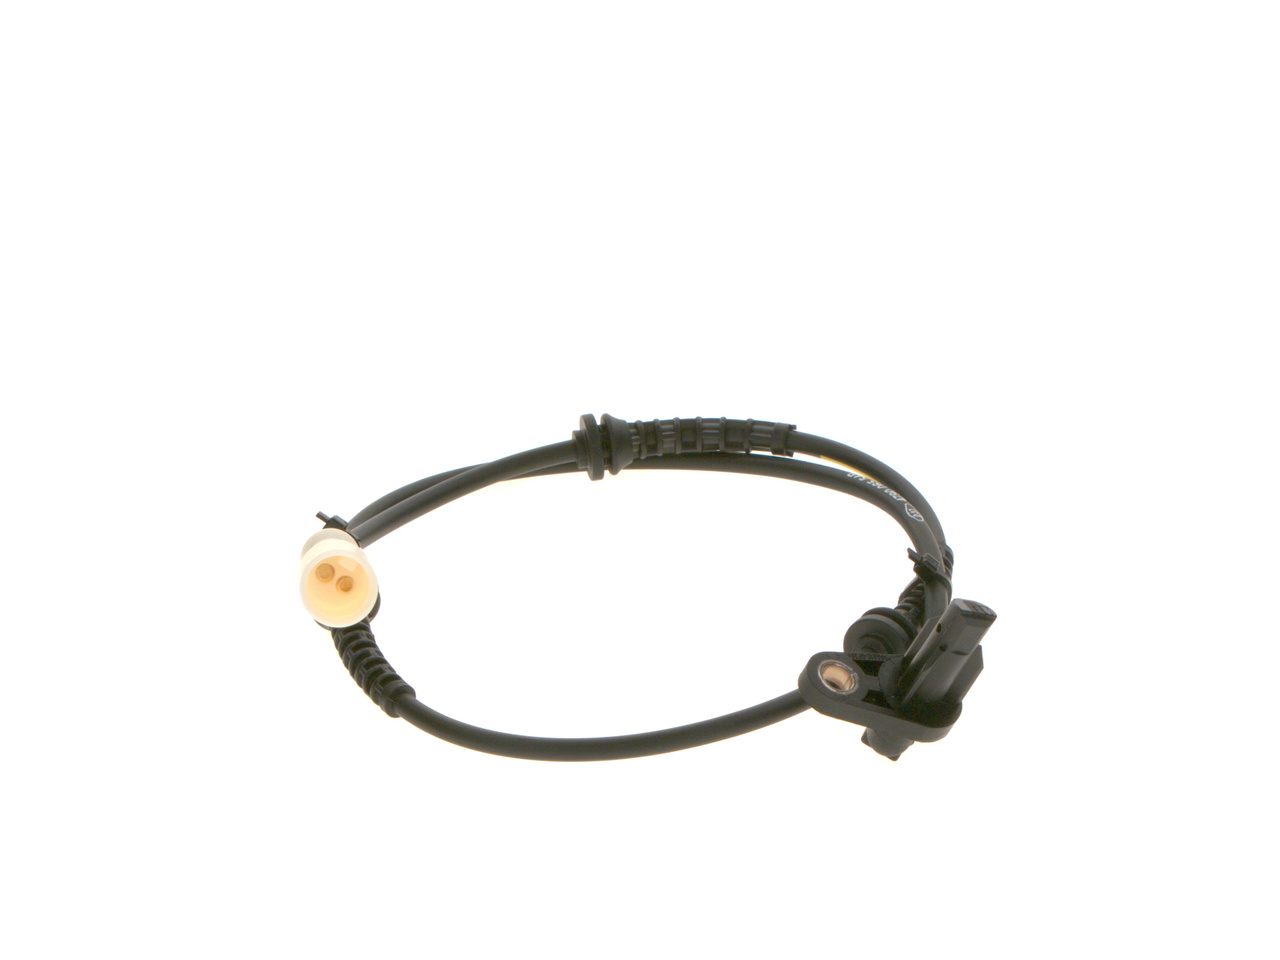 BOSCH 0 265 008 943 ABS sensor with cable, Hall Sensor, 766mm